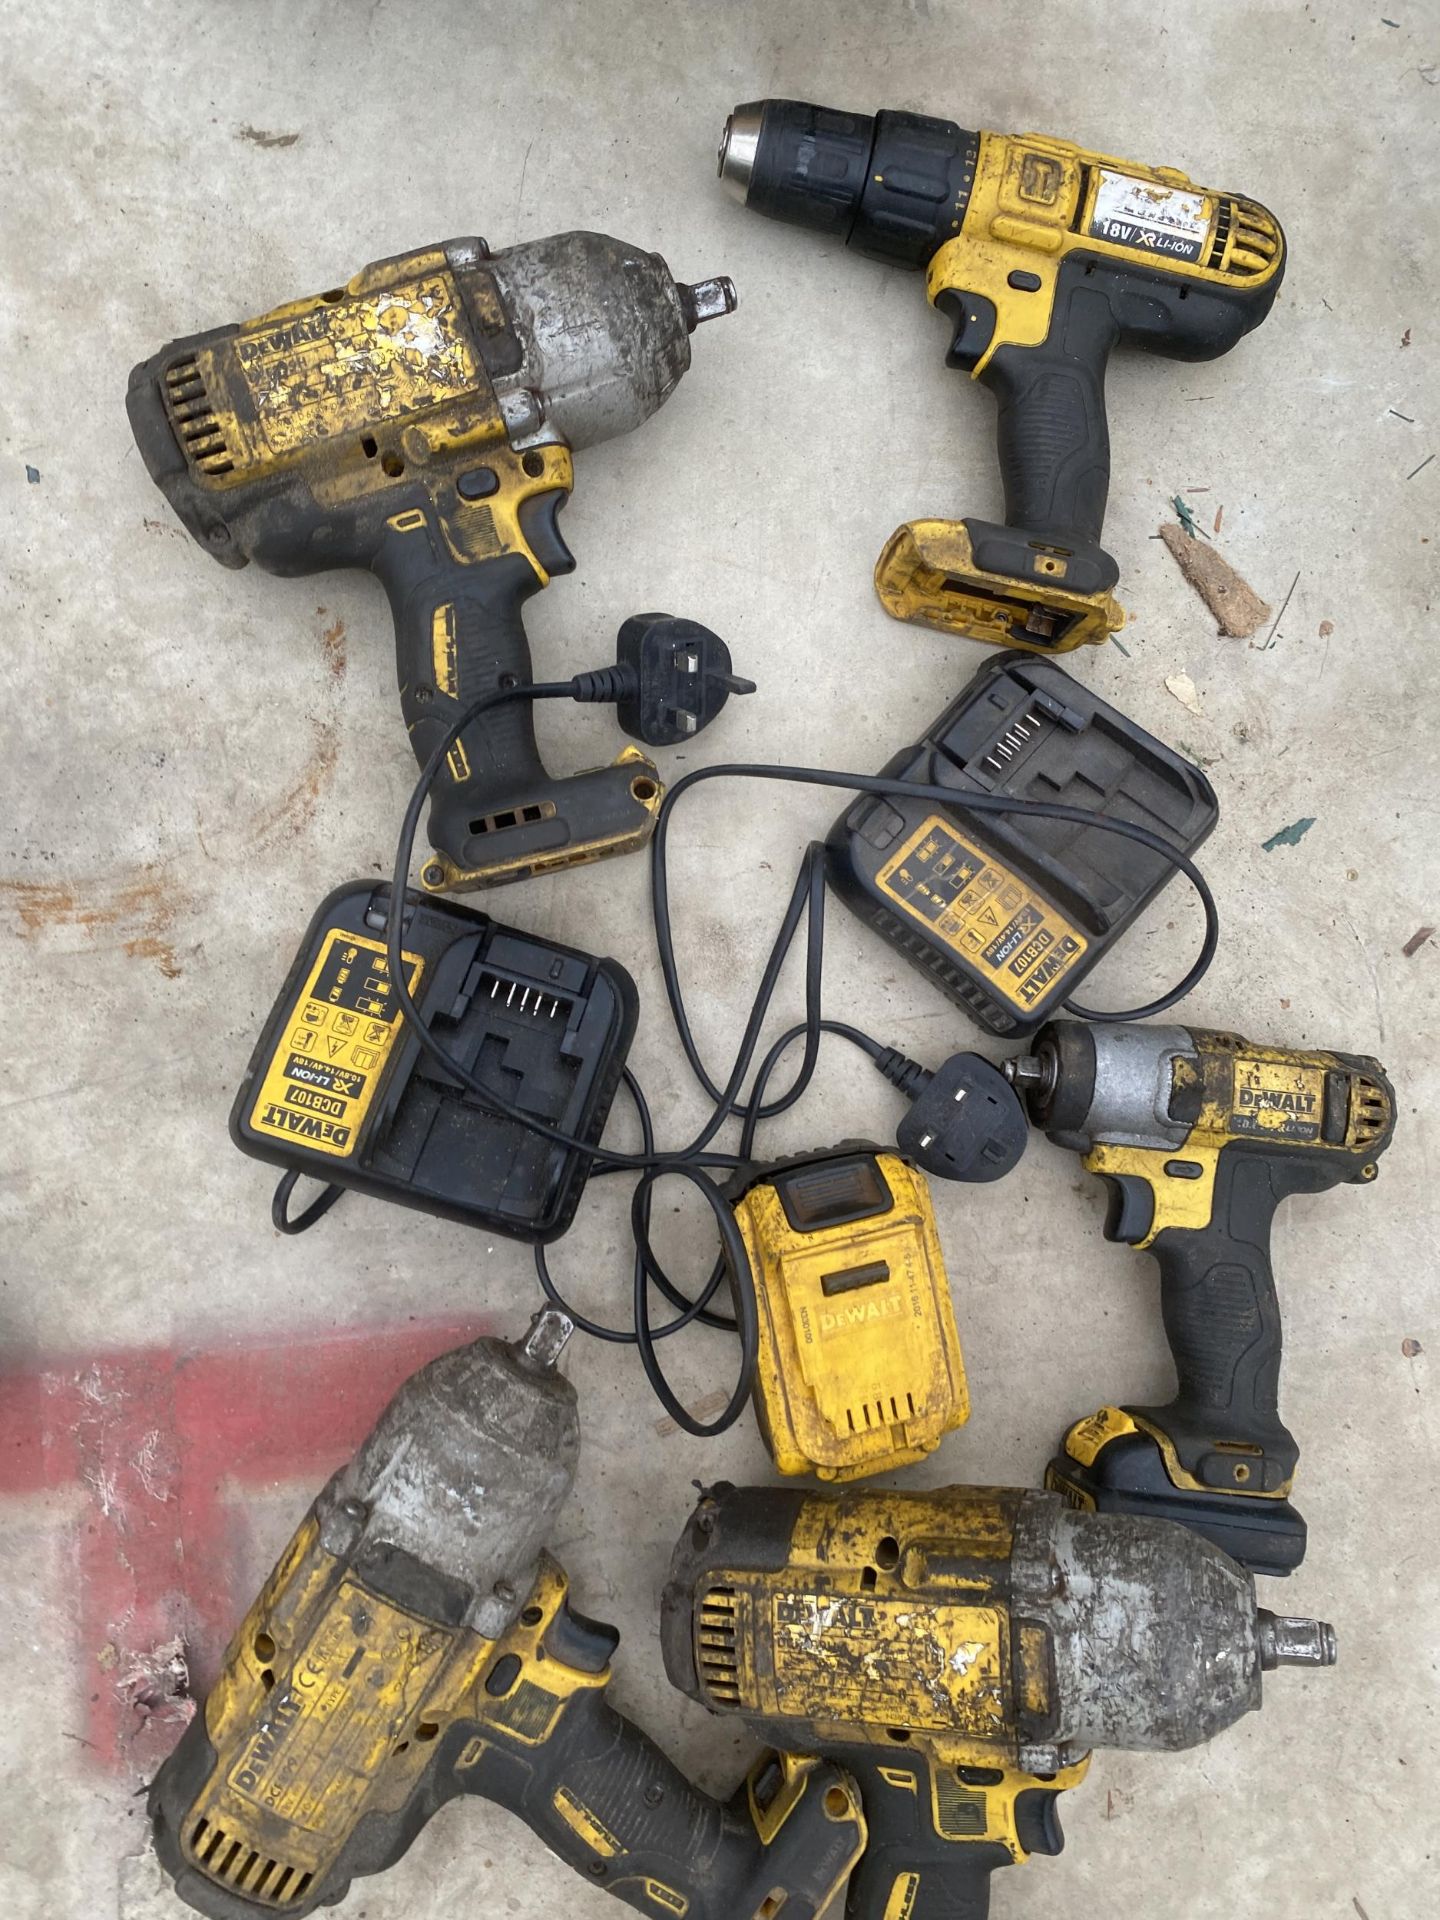 FIVE VARIOUS DEWALT POWER TOOLS TO INCLUDE DRILLS AND IMPACT WRENCHES ETC WITH CHARGERS AND CASE ETC - Image 2 of 2